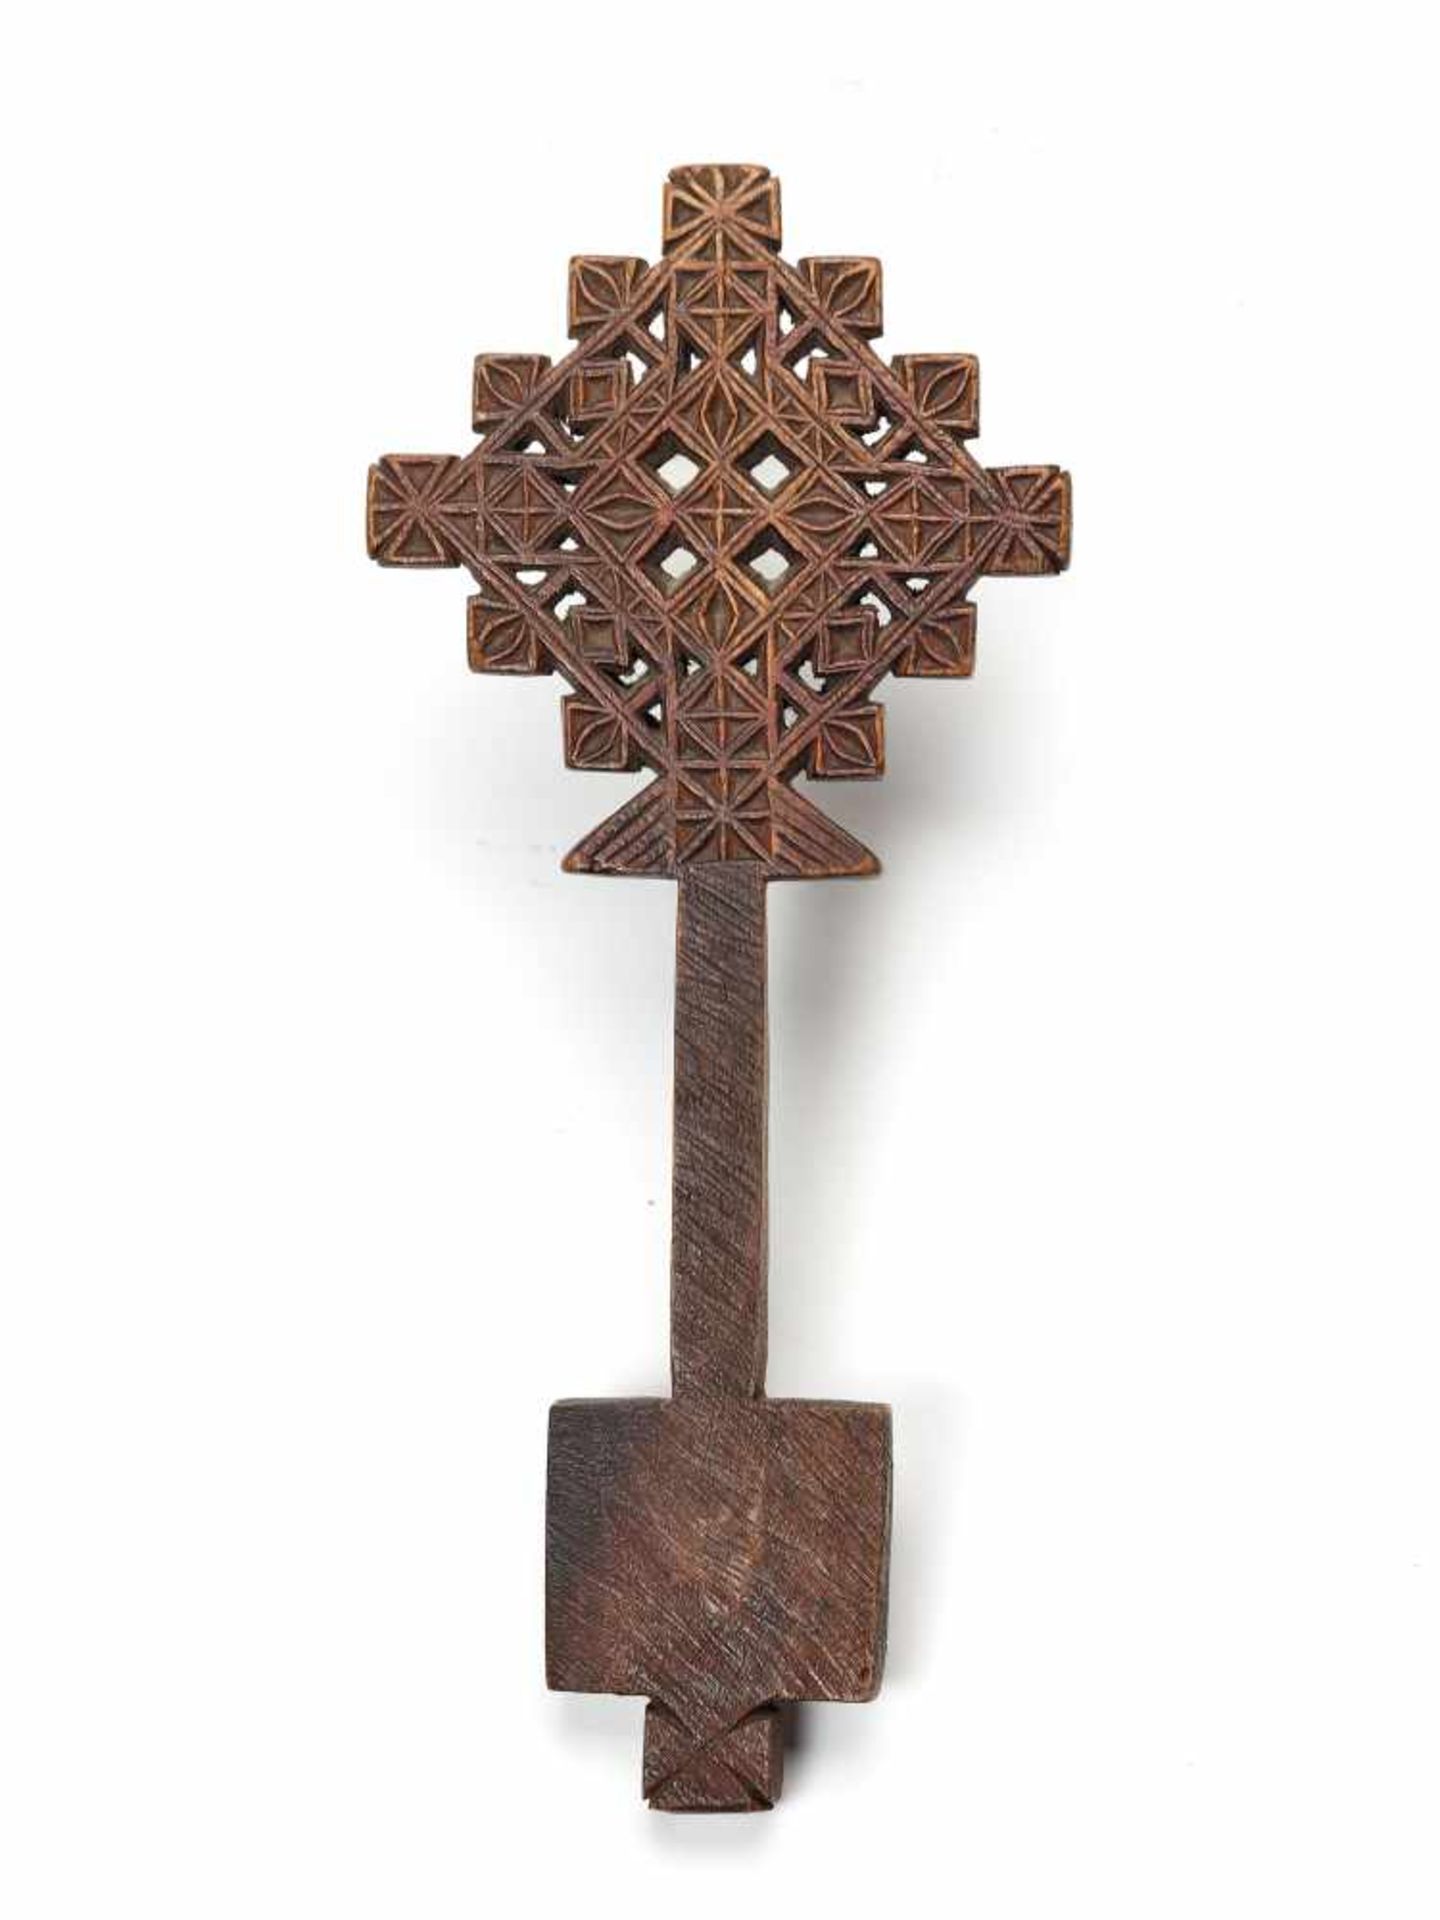 AN ETHIOPIAN PROCESSIONAL CROSS, CARVED AND OPENWORKED WOOD, 19TH CENTURYWoodEthiopia, late 19th